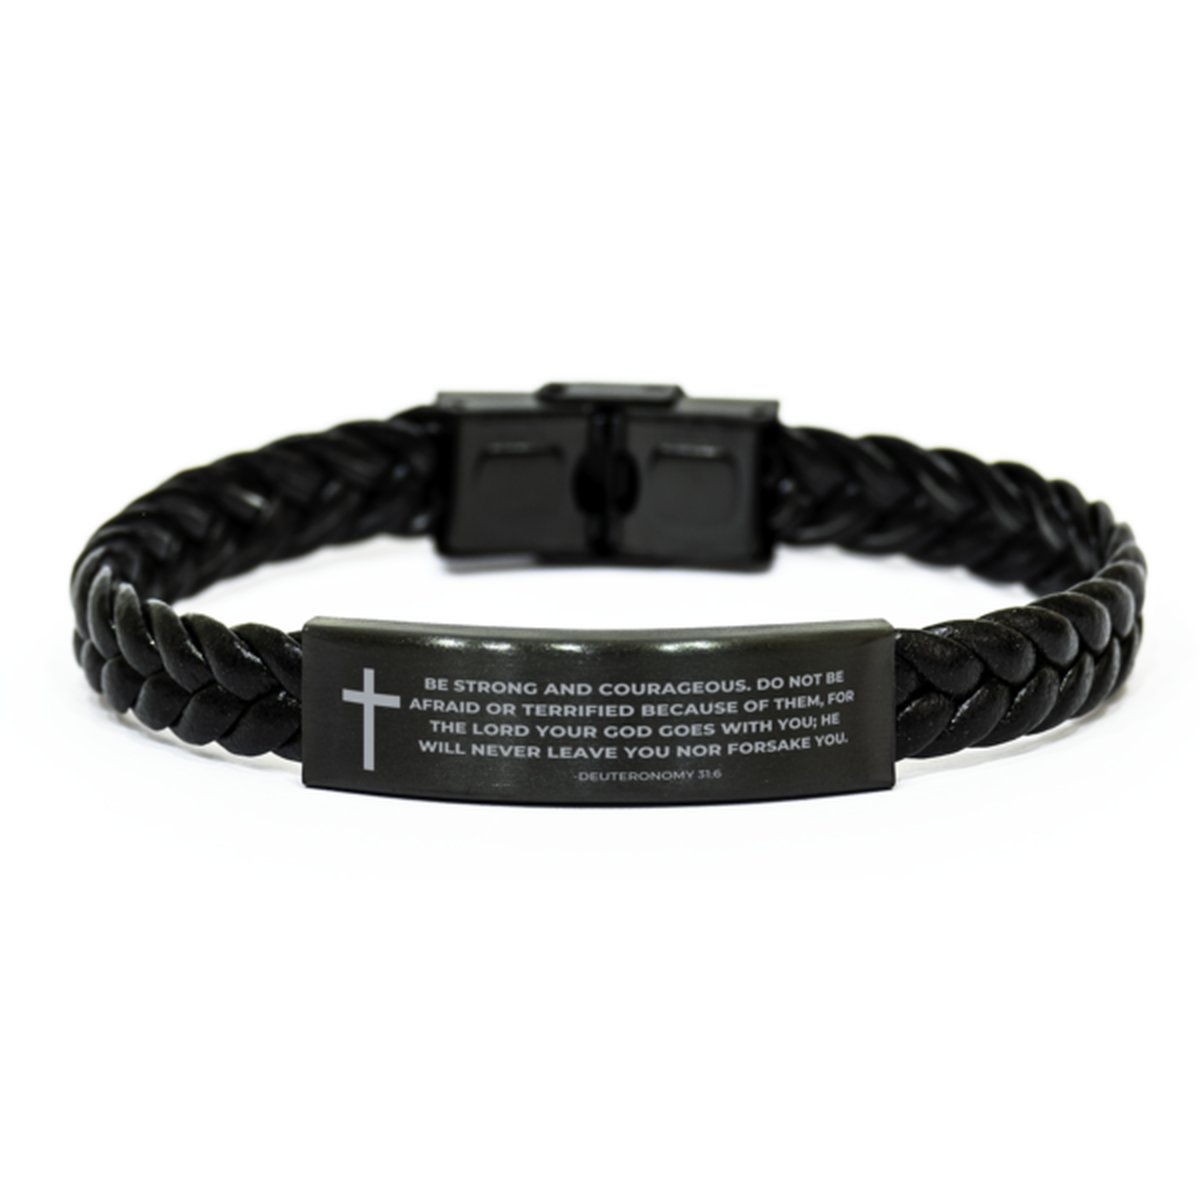 Baptism Gifts For Teenage Boys Girls, Christian Bible Verse Braided Leather Bracelet, He will never leave you nor forsake you, Catholic Confirmation Gifts for Son, Godson, Grandson, Nephew